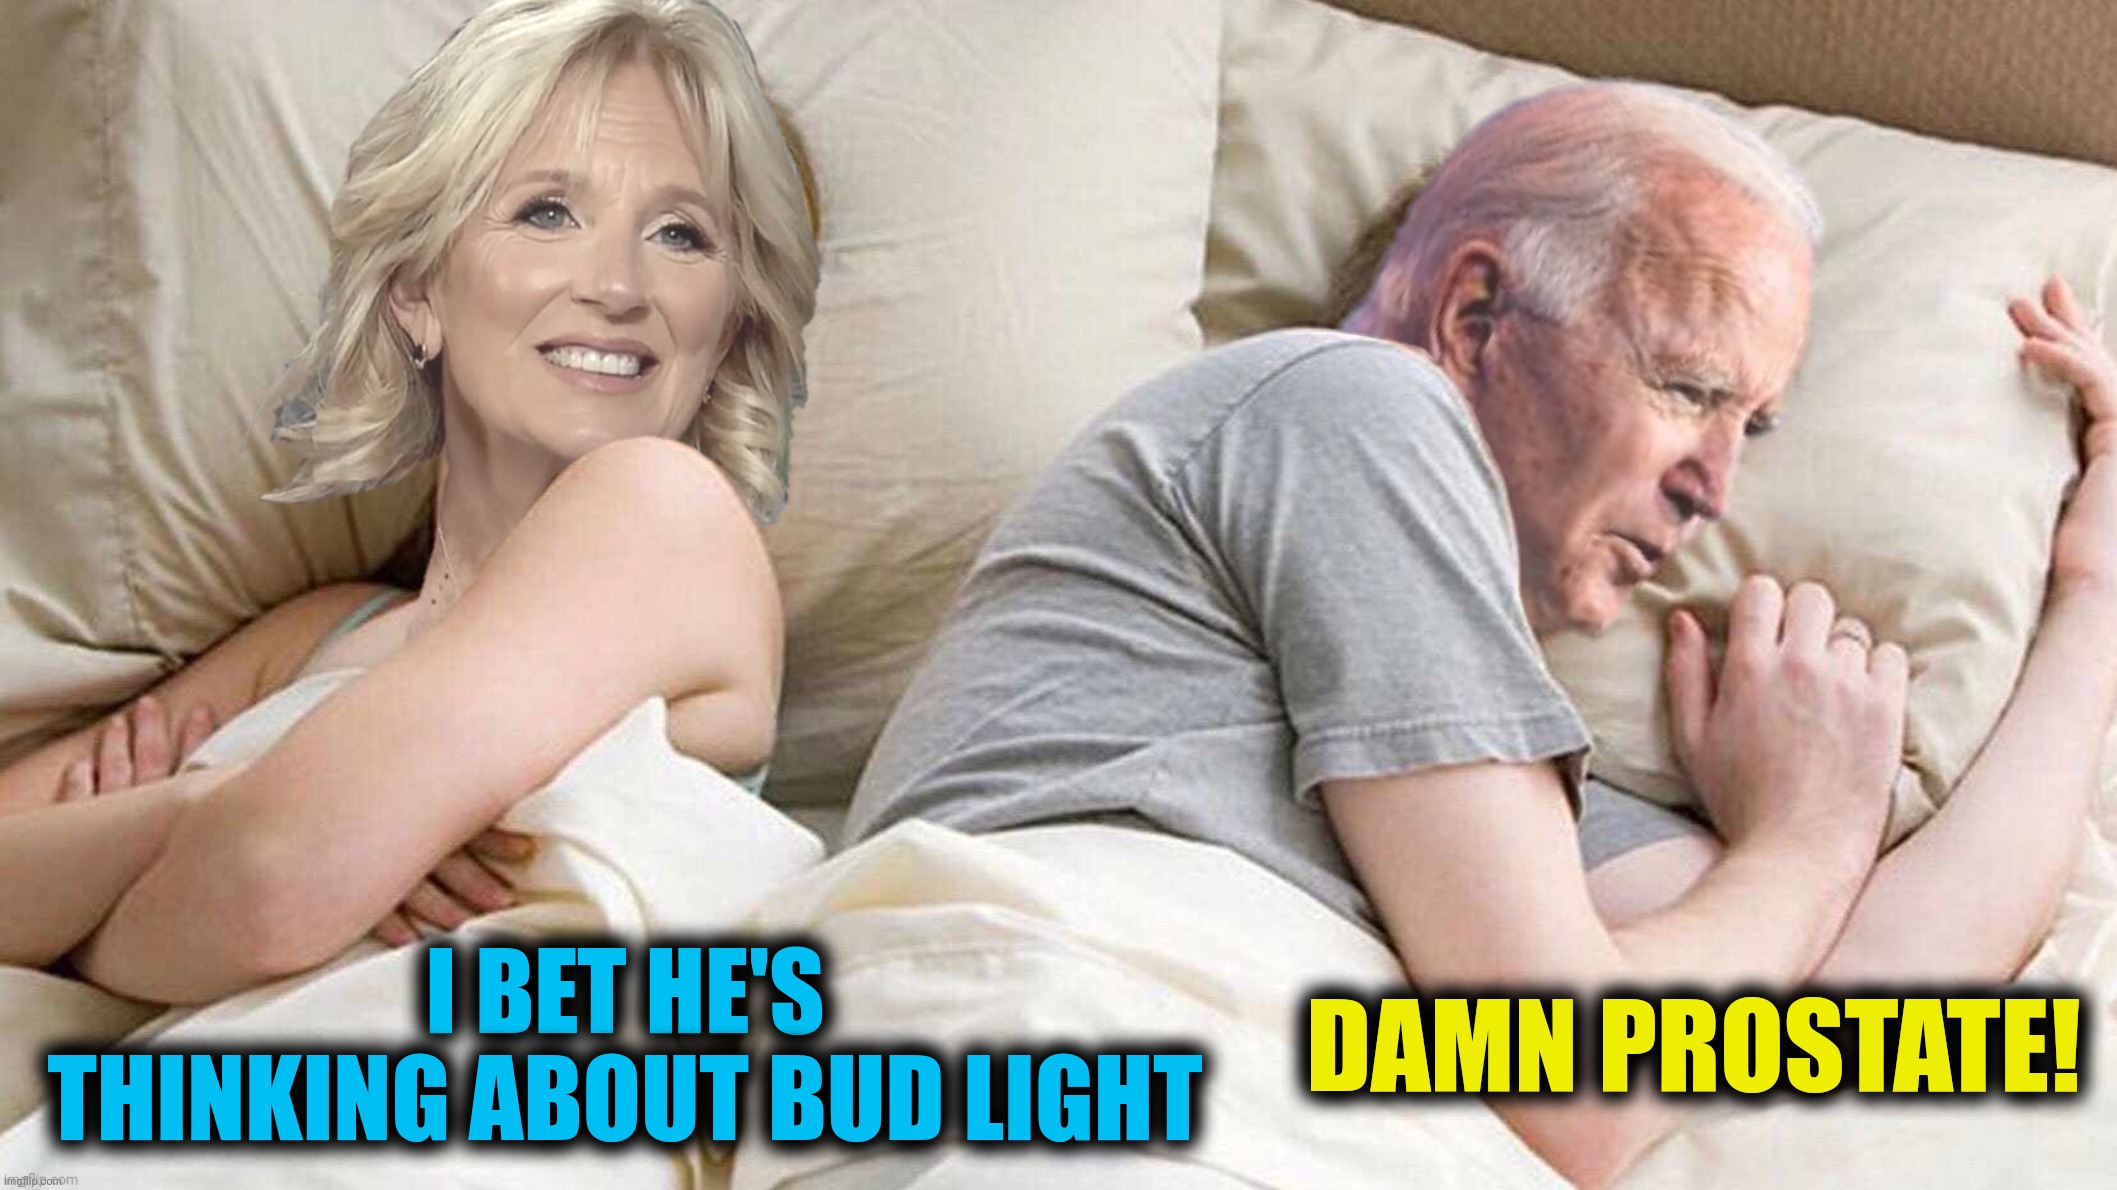 I BET HE'S THINKING ABOUT BUD LIGHT DAMN PROSTATE! | made w/ Imgflip meme maker